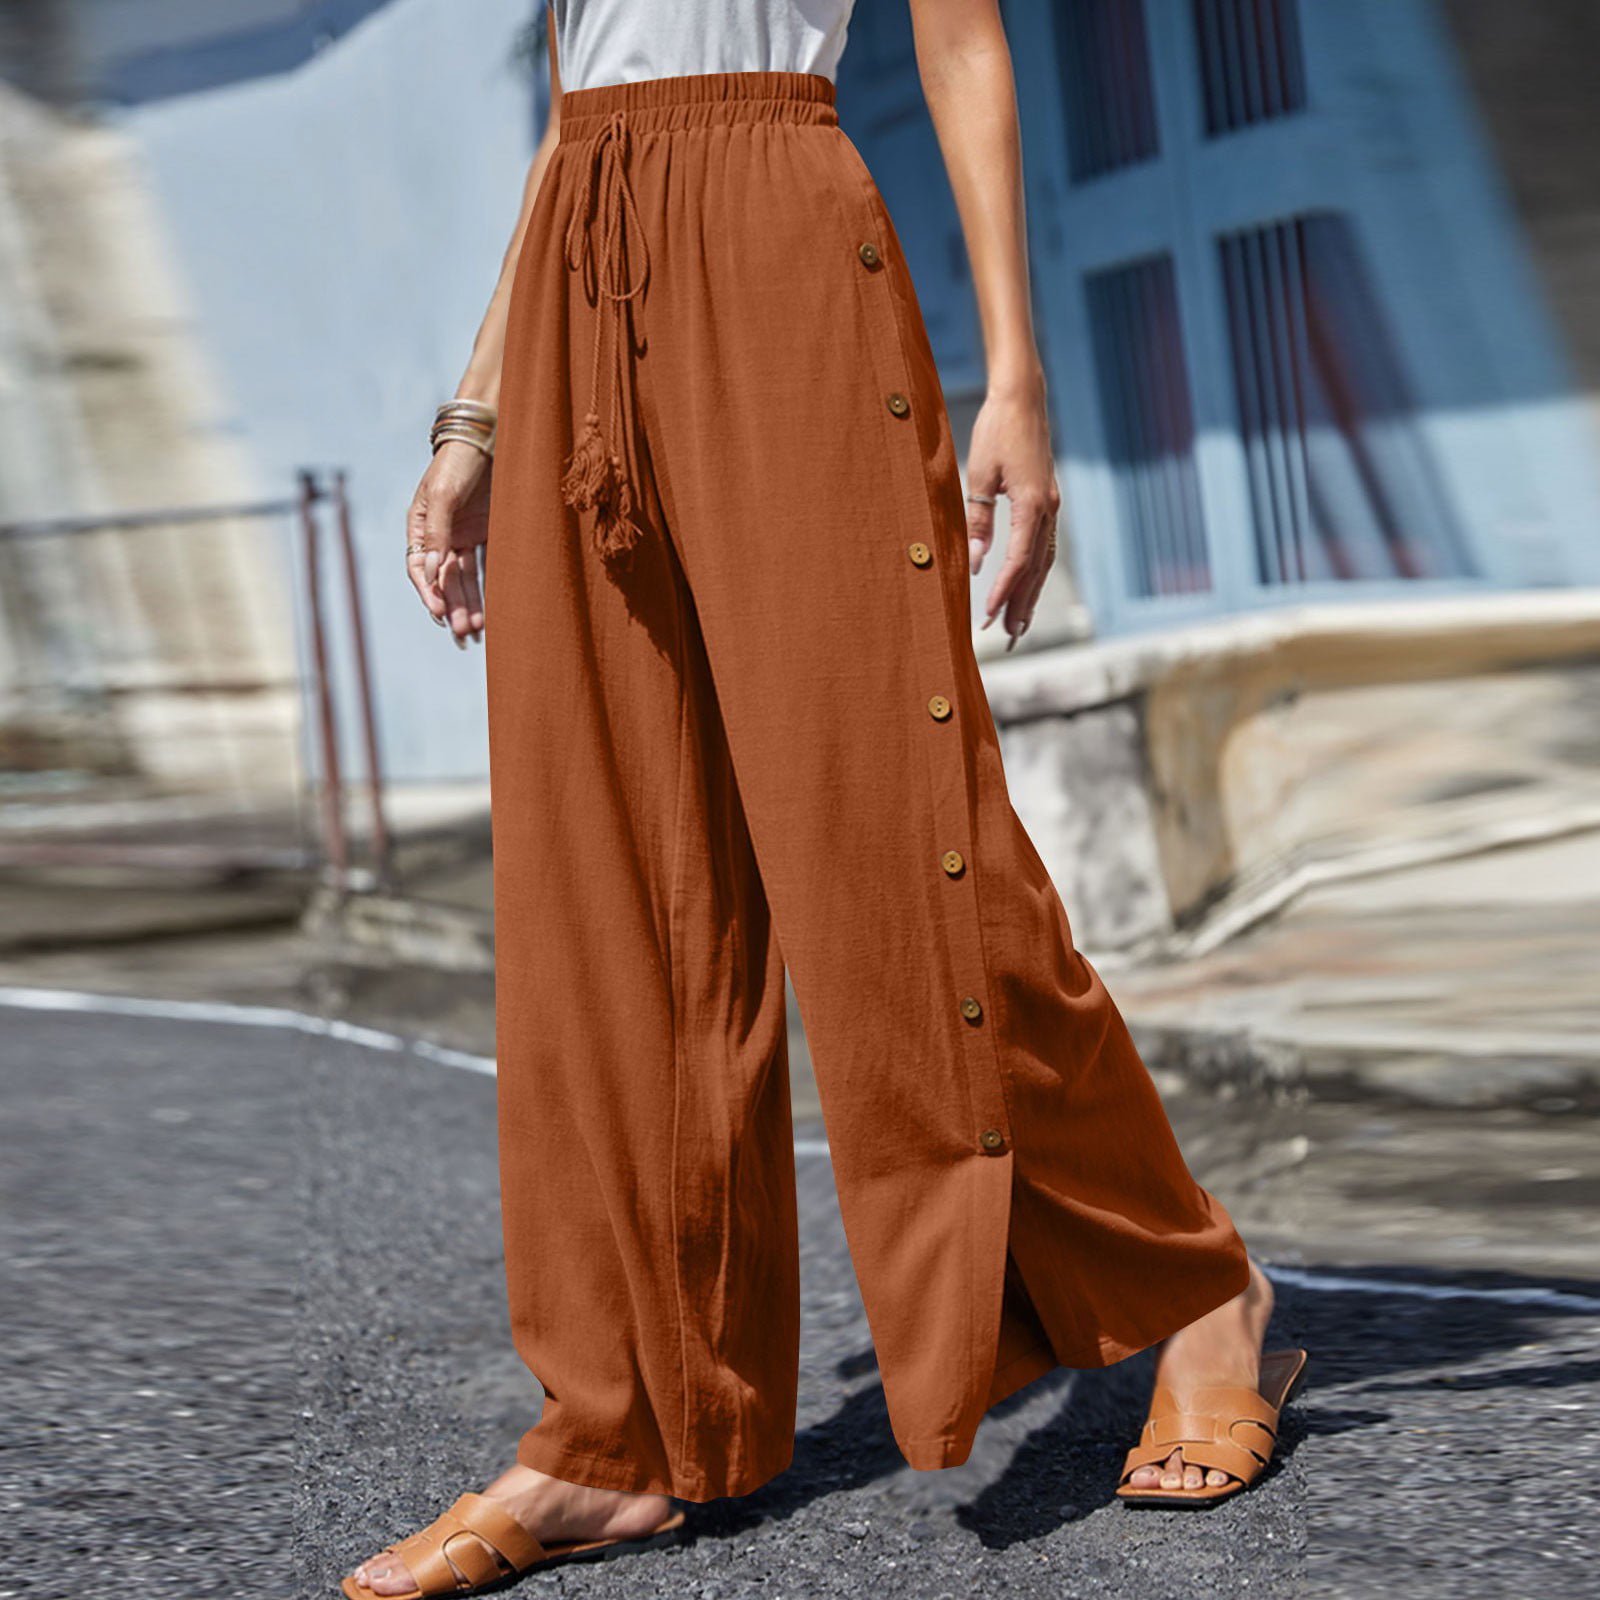 Xysaqa Cute Summer Outfits for Women, Women's Casual High Waist Wide Leg Comfy  Pants Elastic Waisted Loose Fit Trousers 